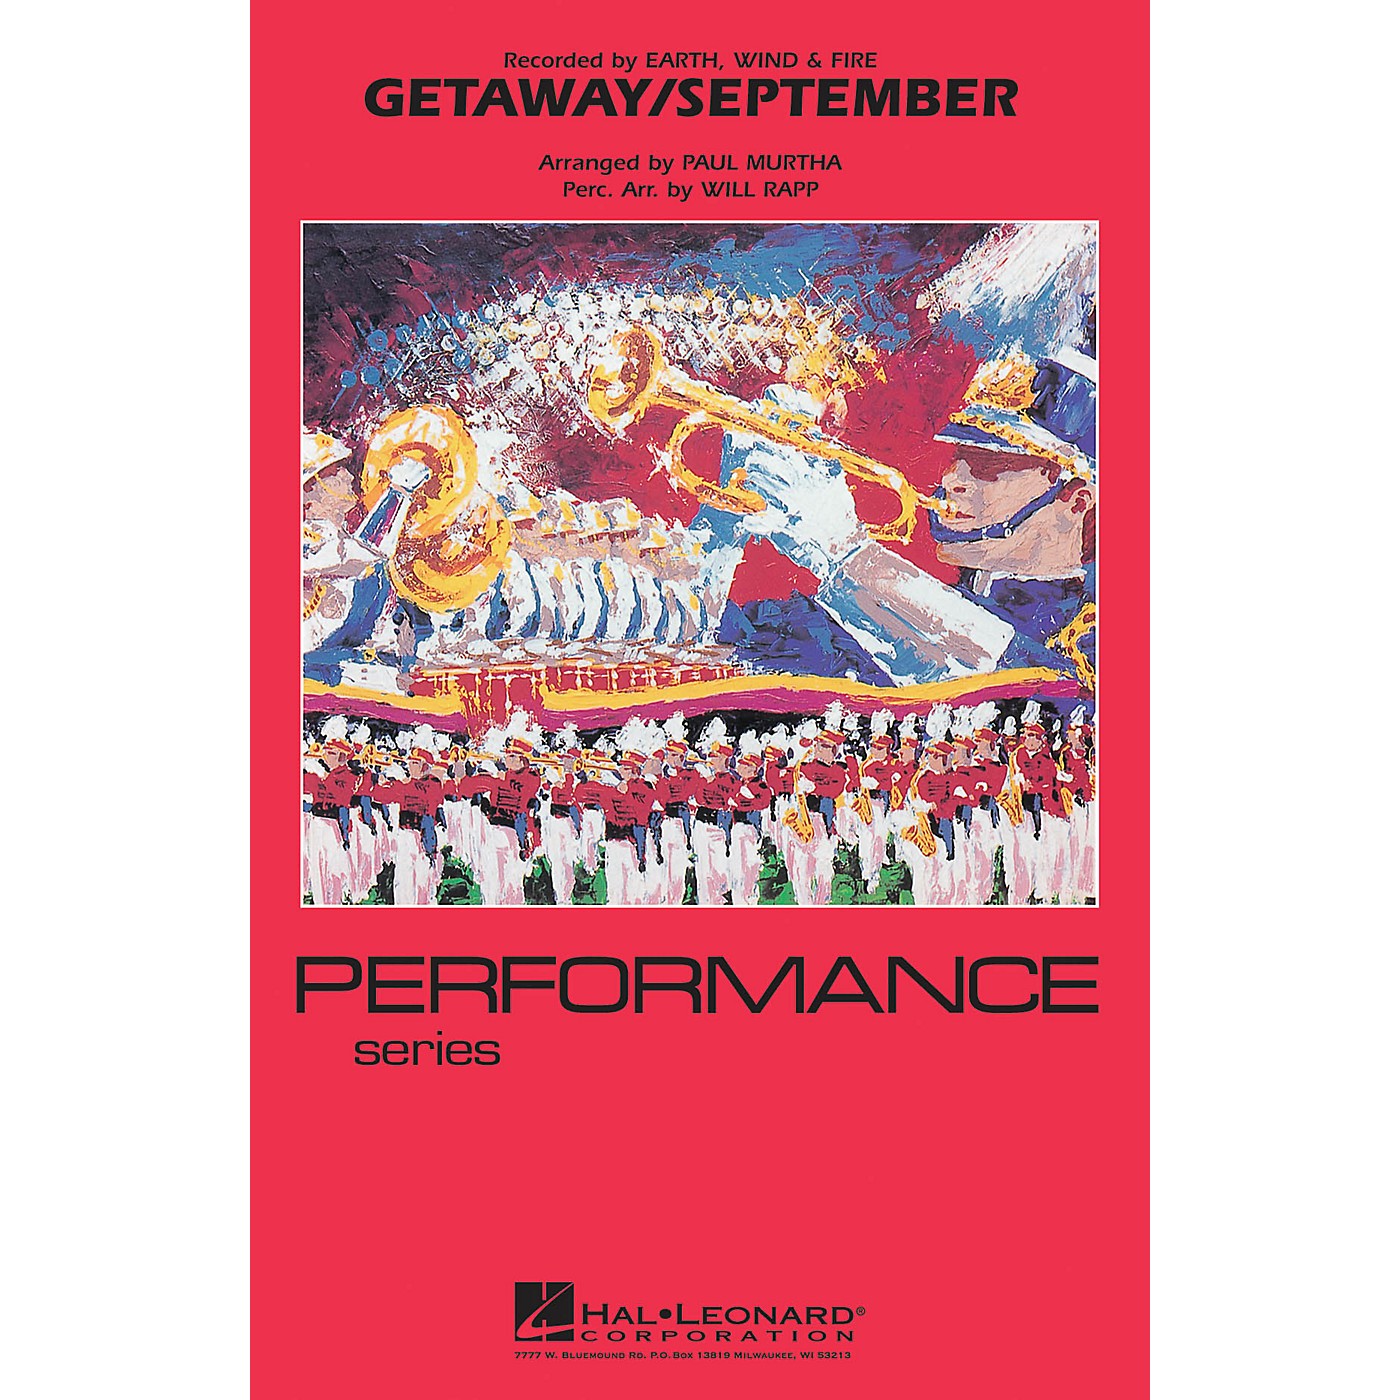 Hal Leonard Getaway/September Marching Band Level 4 by Earth, Wind & Fire Arranged by Paul Murtha thumbnail